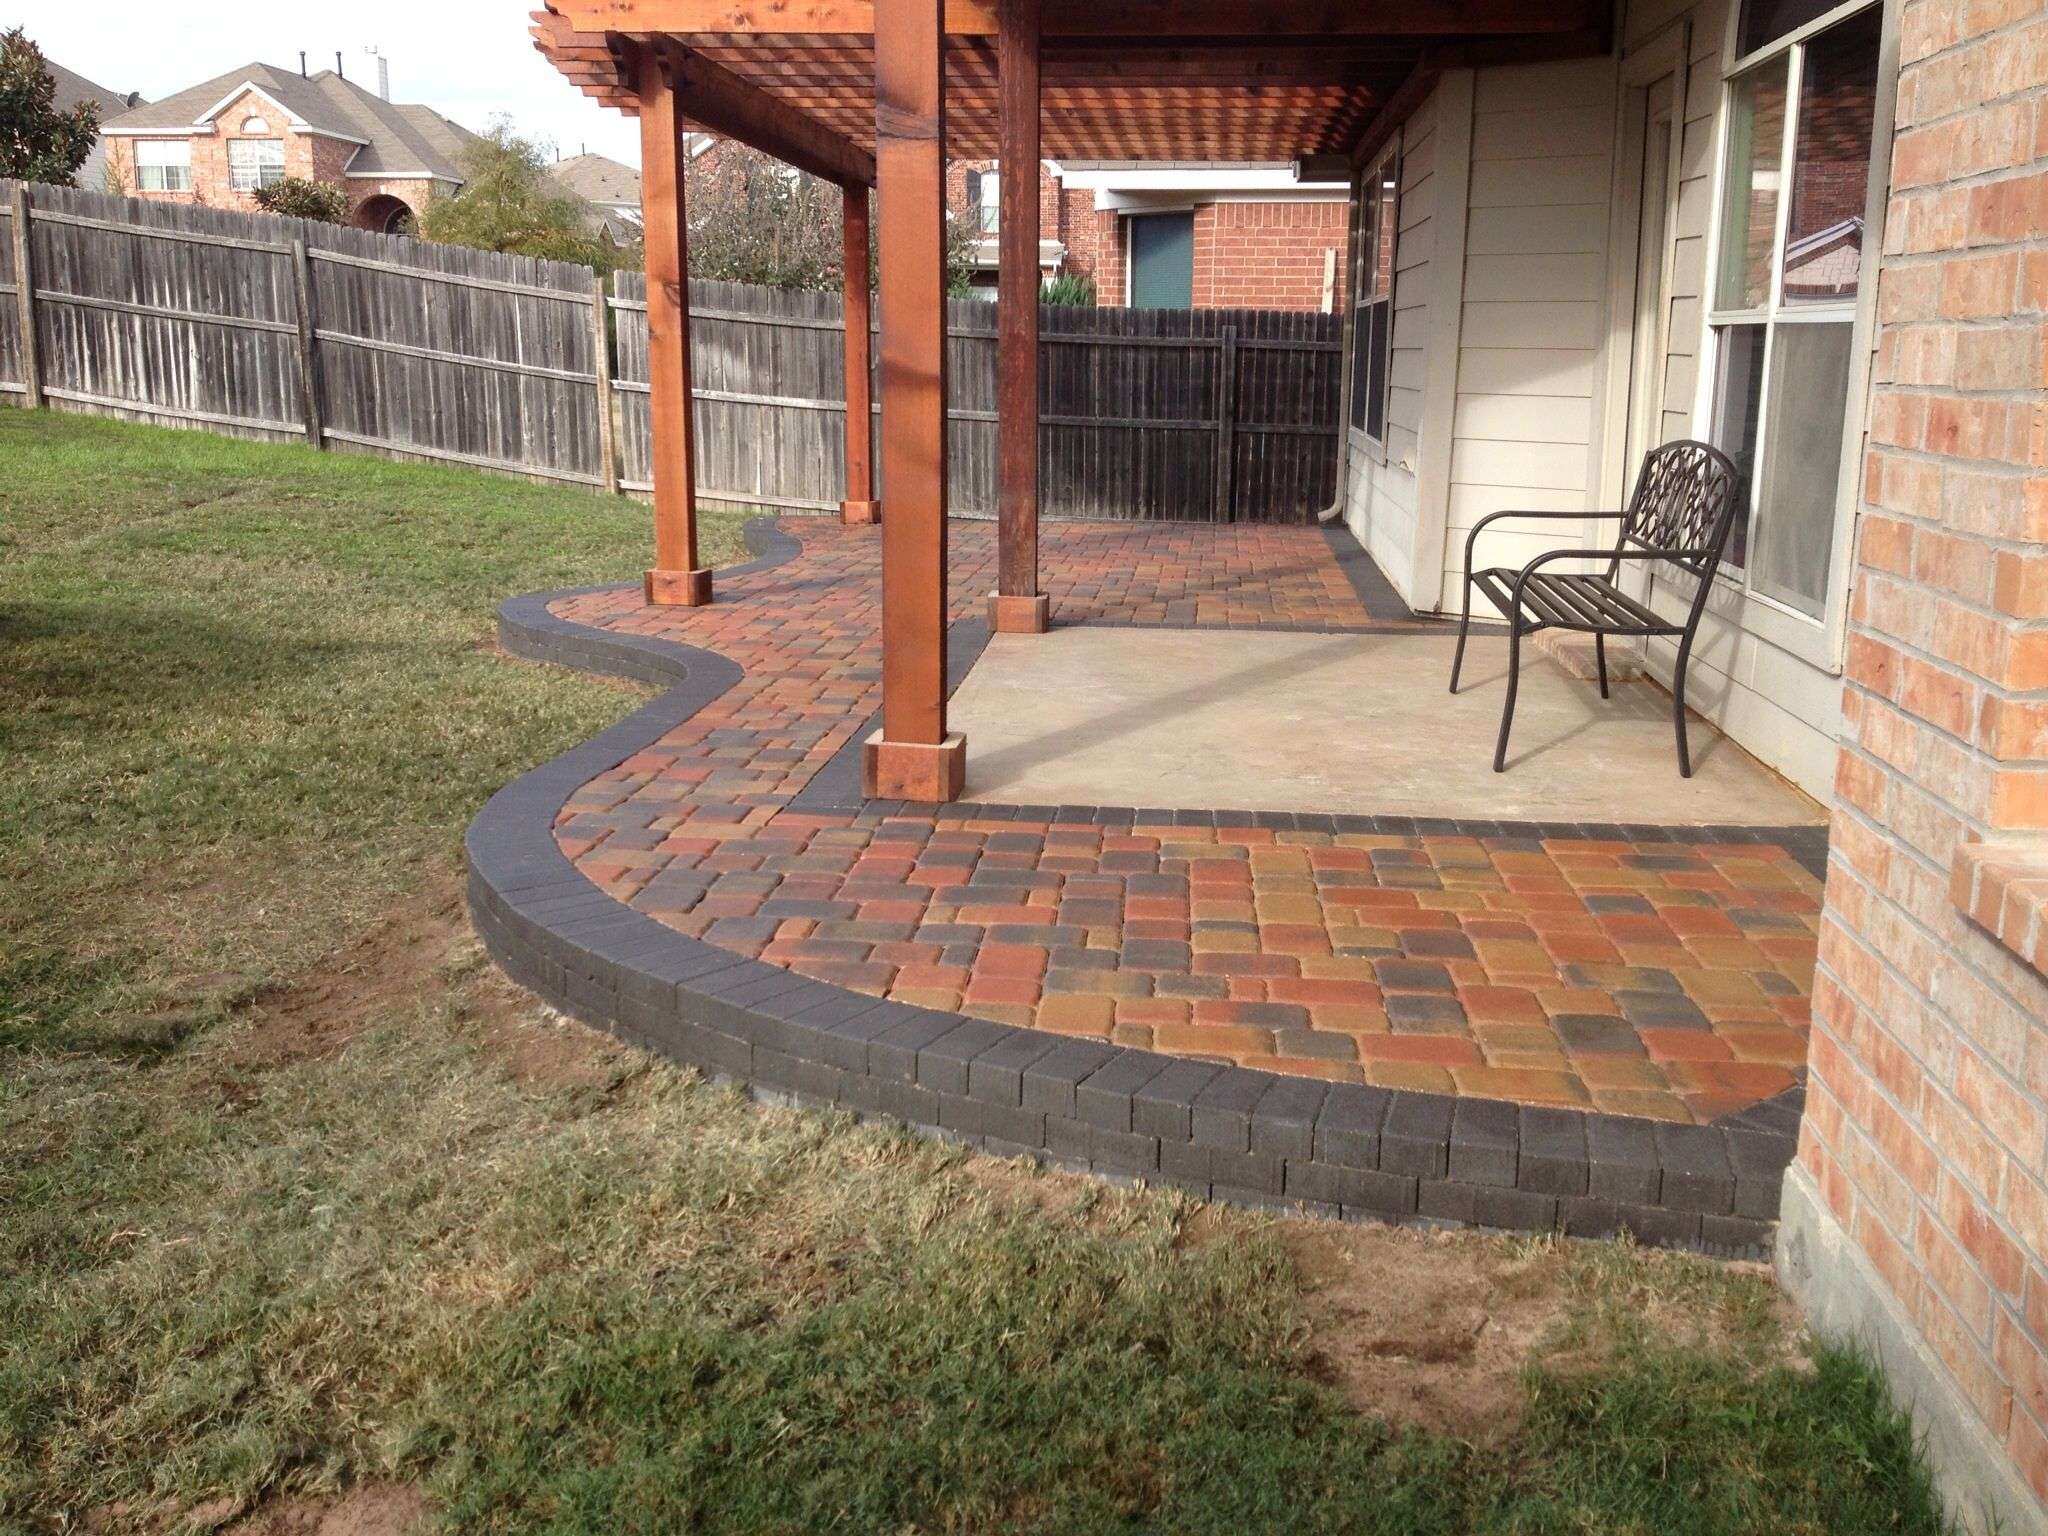 Multicolored paver patio installed around an existing ...